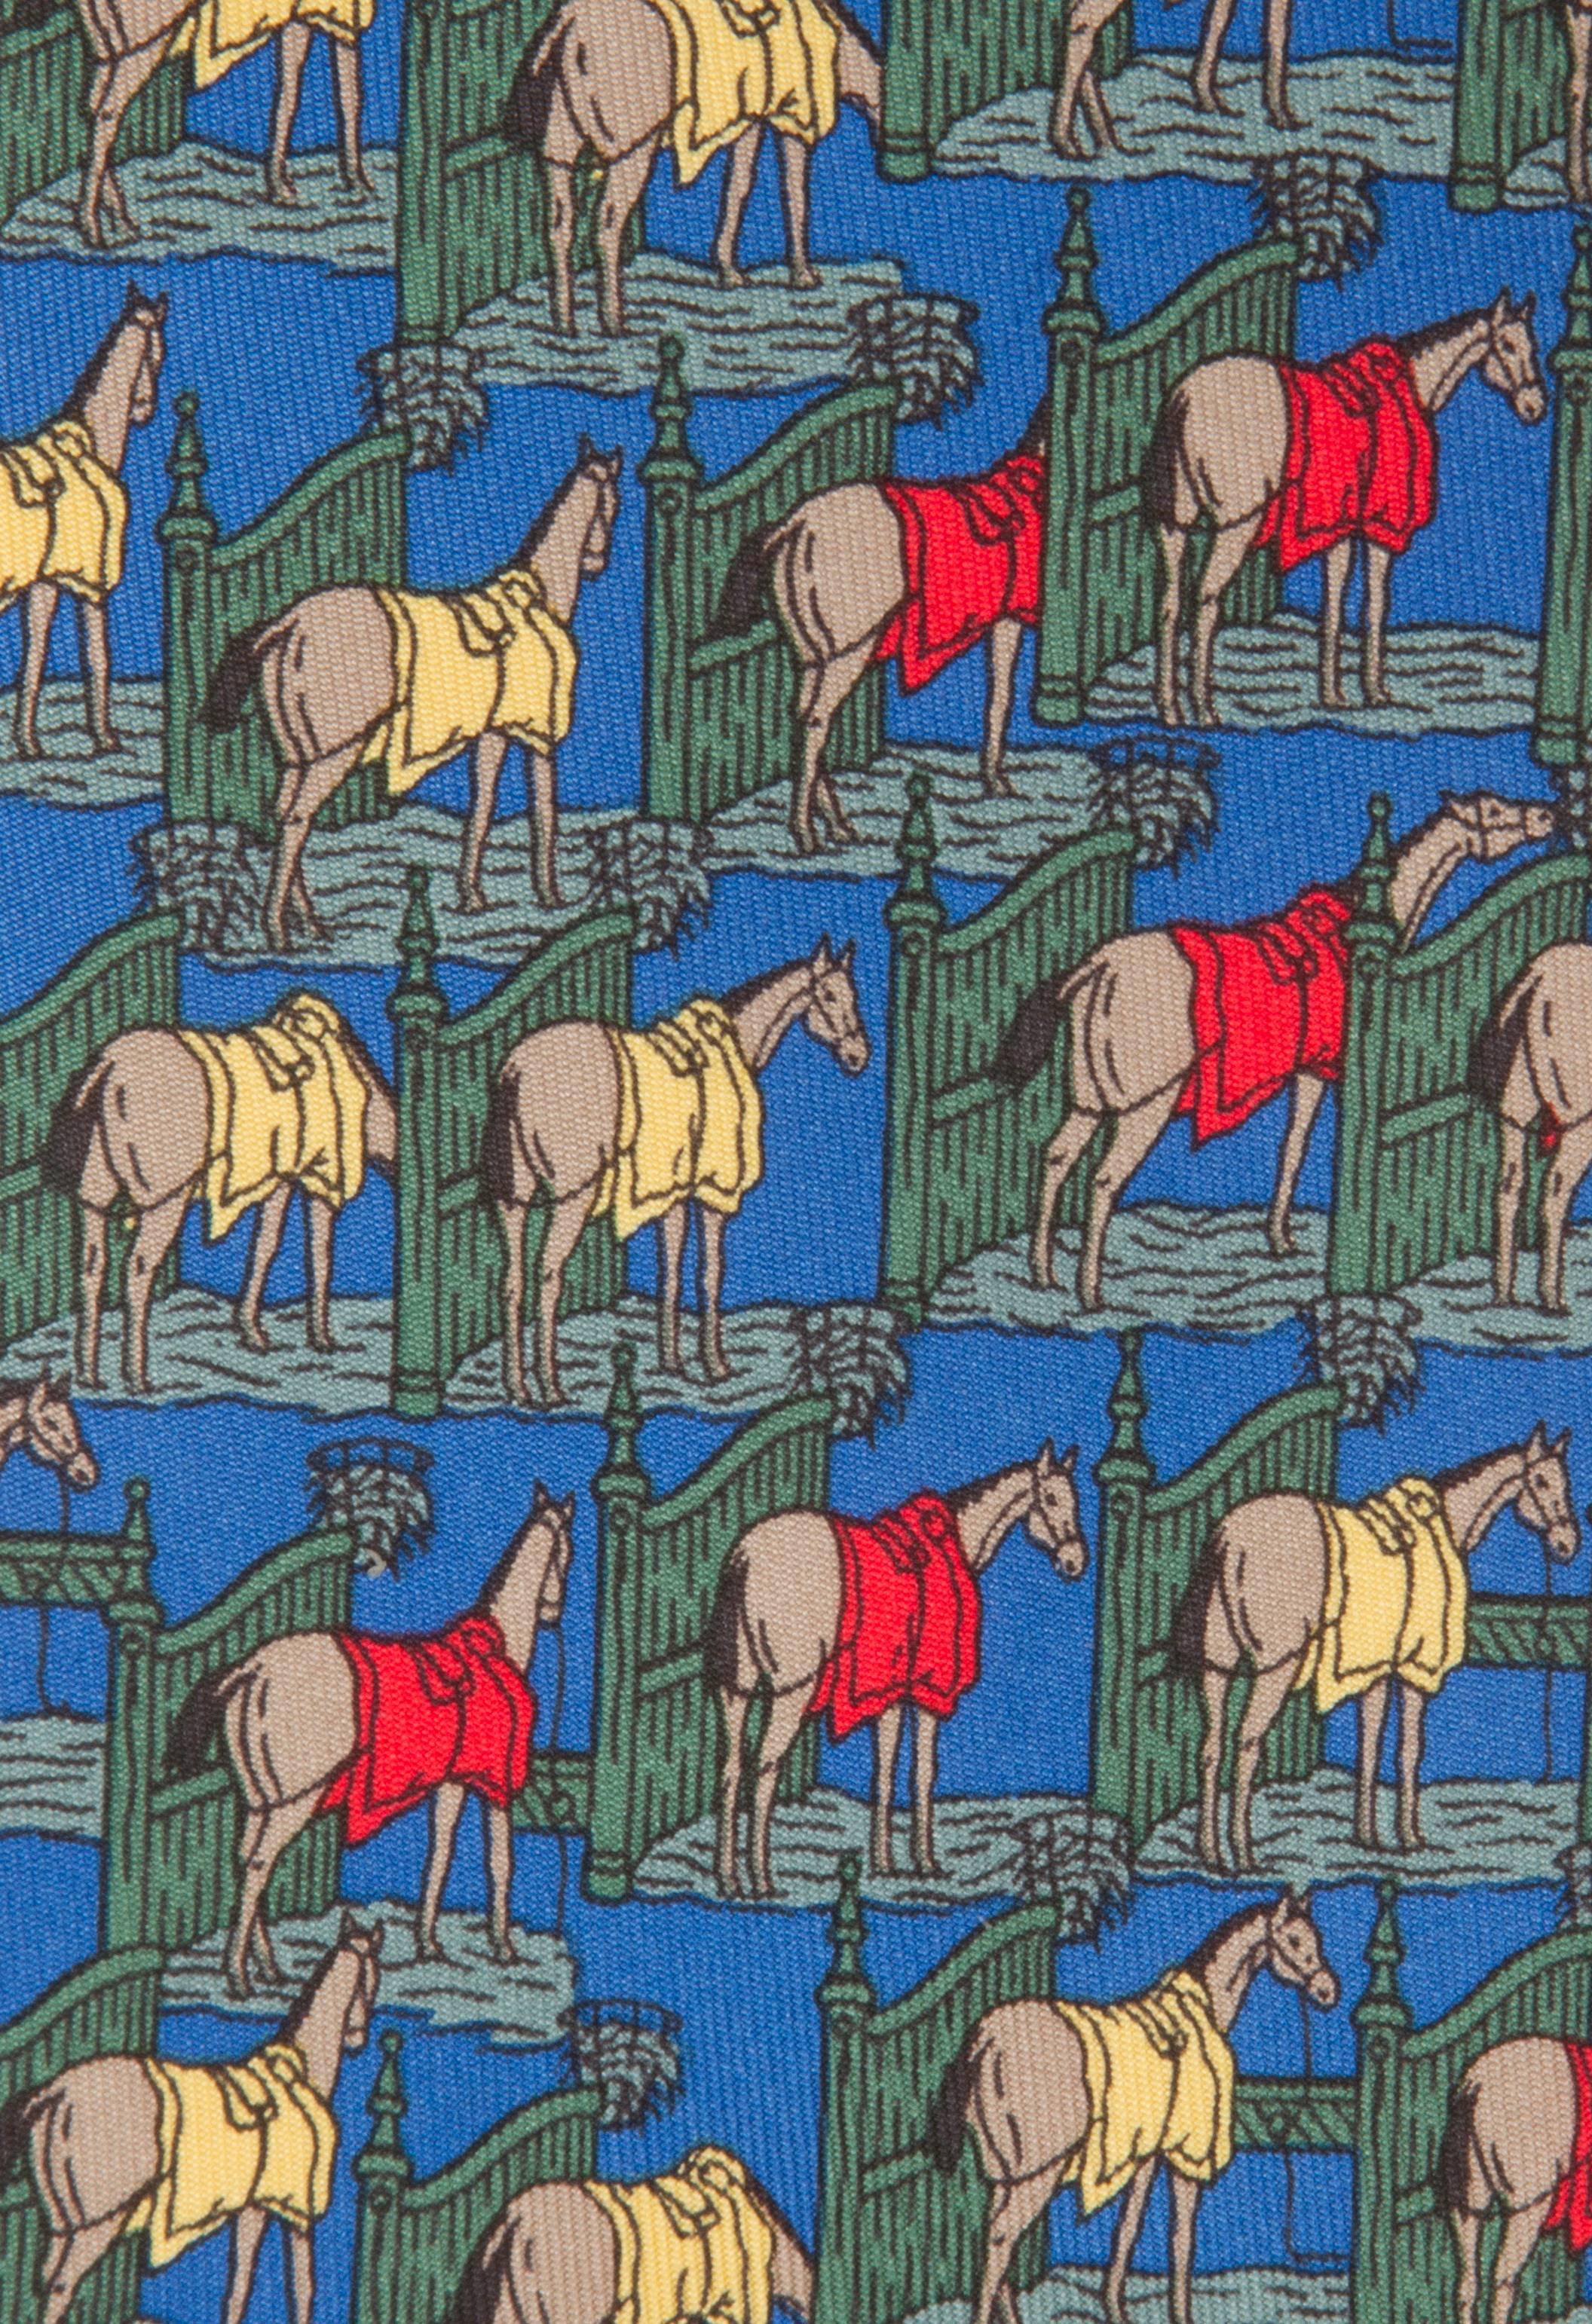 A wonderful yellow and red blanketed horsey tie on a blue background.